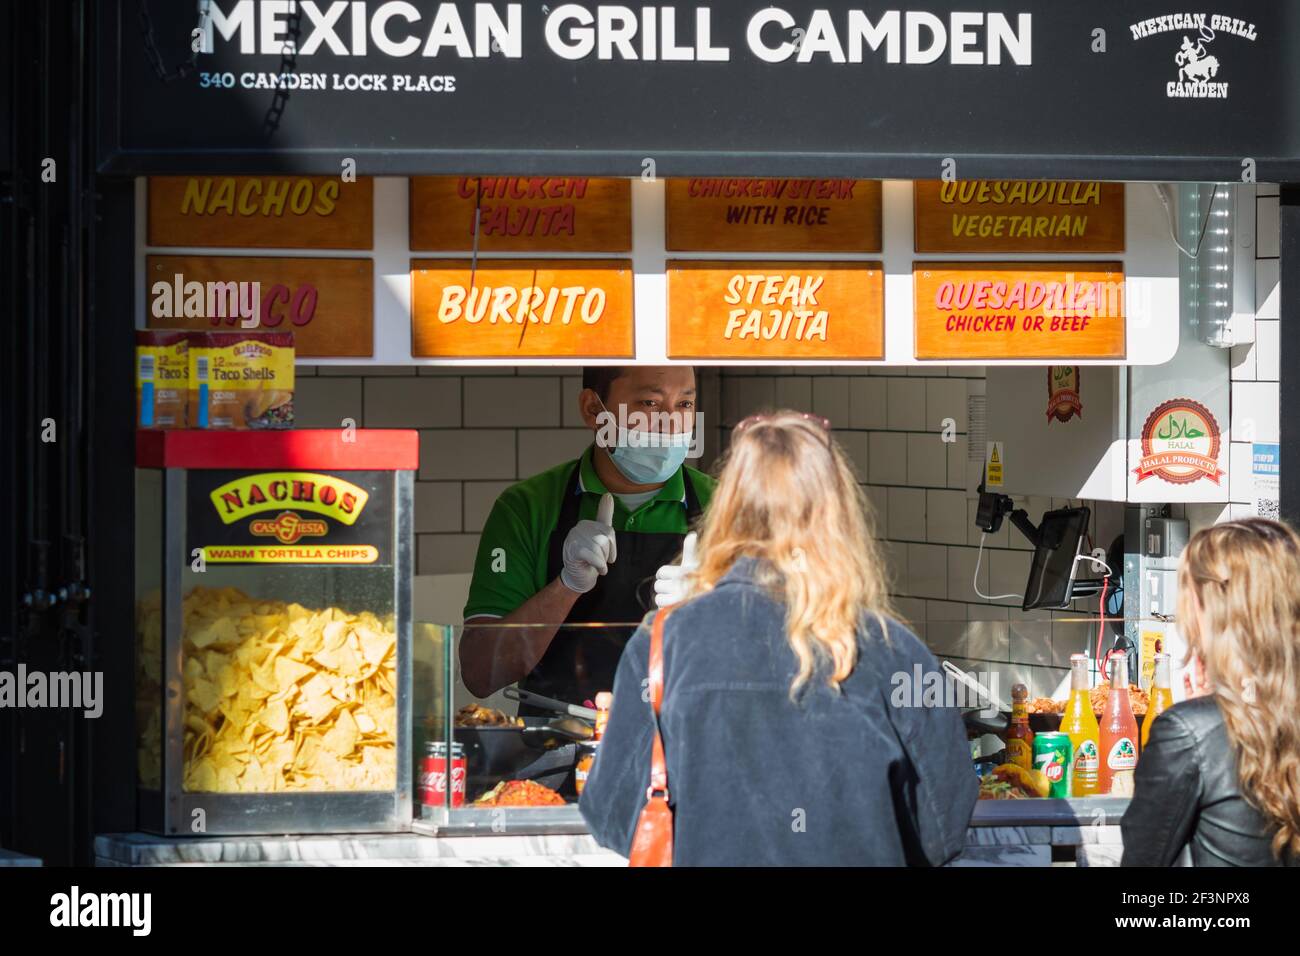 London, UK - 26 February, 2021 - A male staff wearing a face mask serving customers at the Mexican food stall in Camden Market Stock Photo